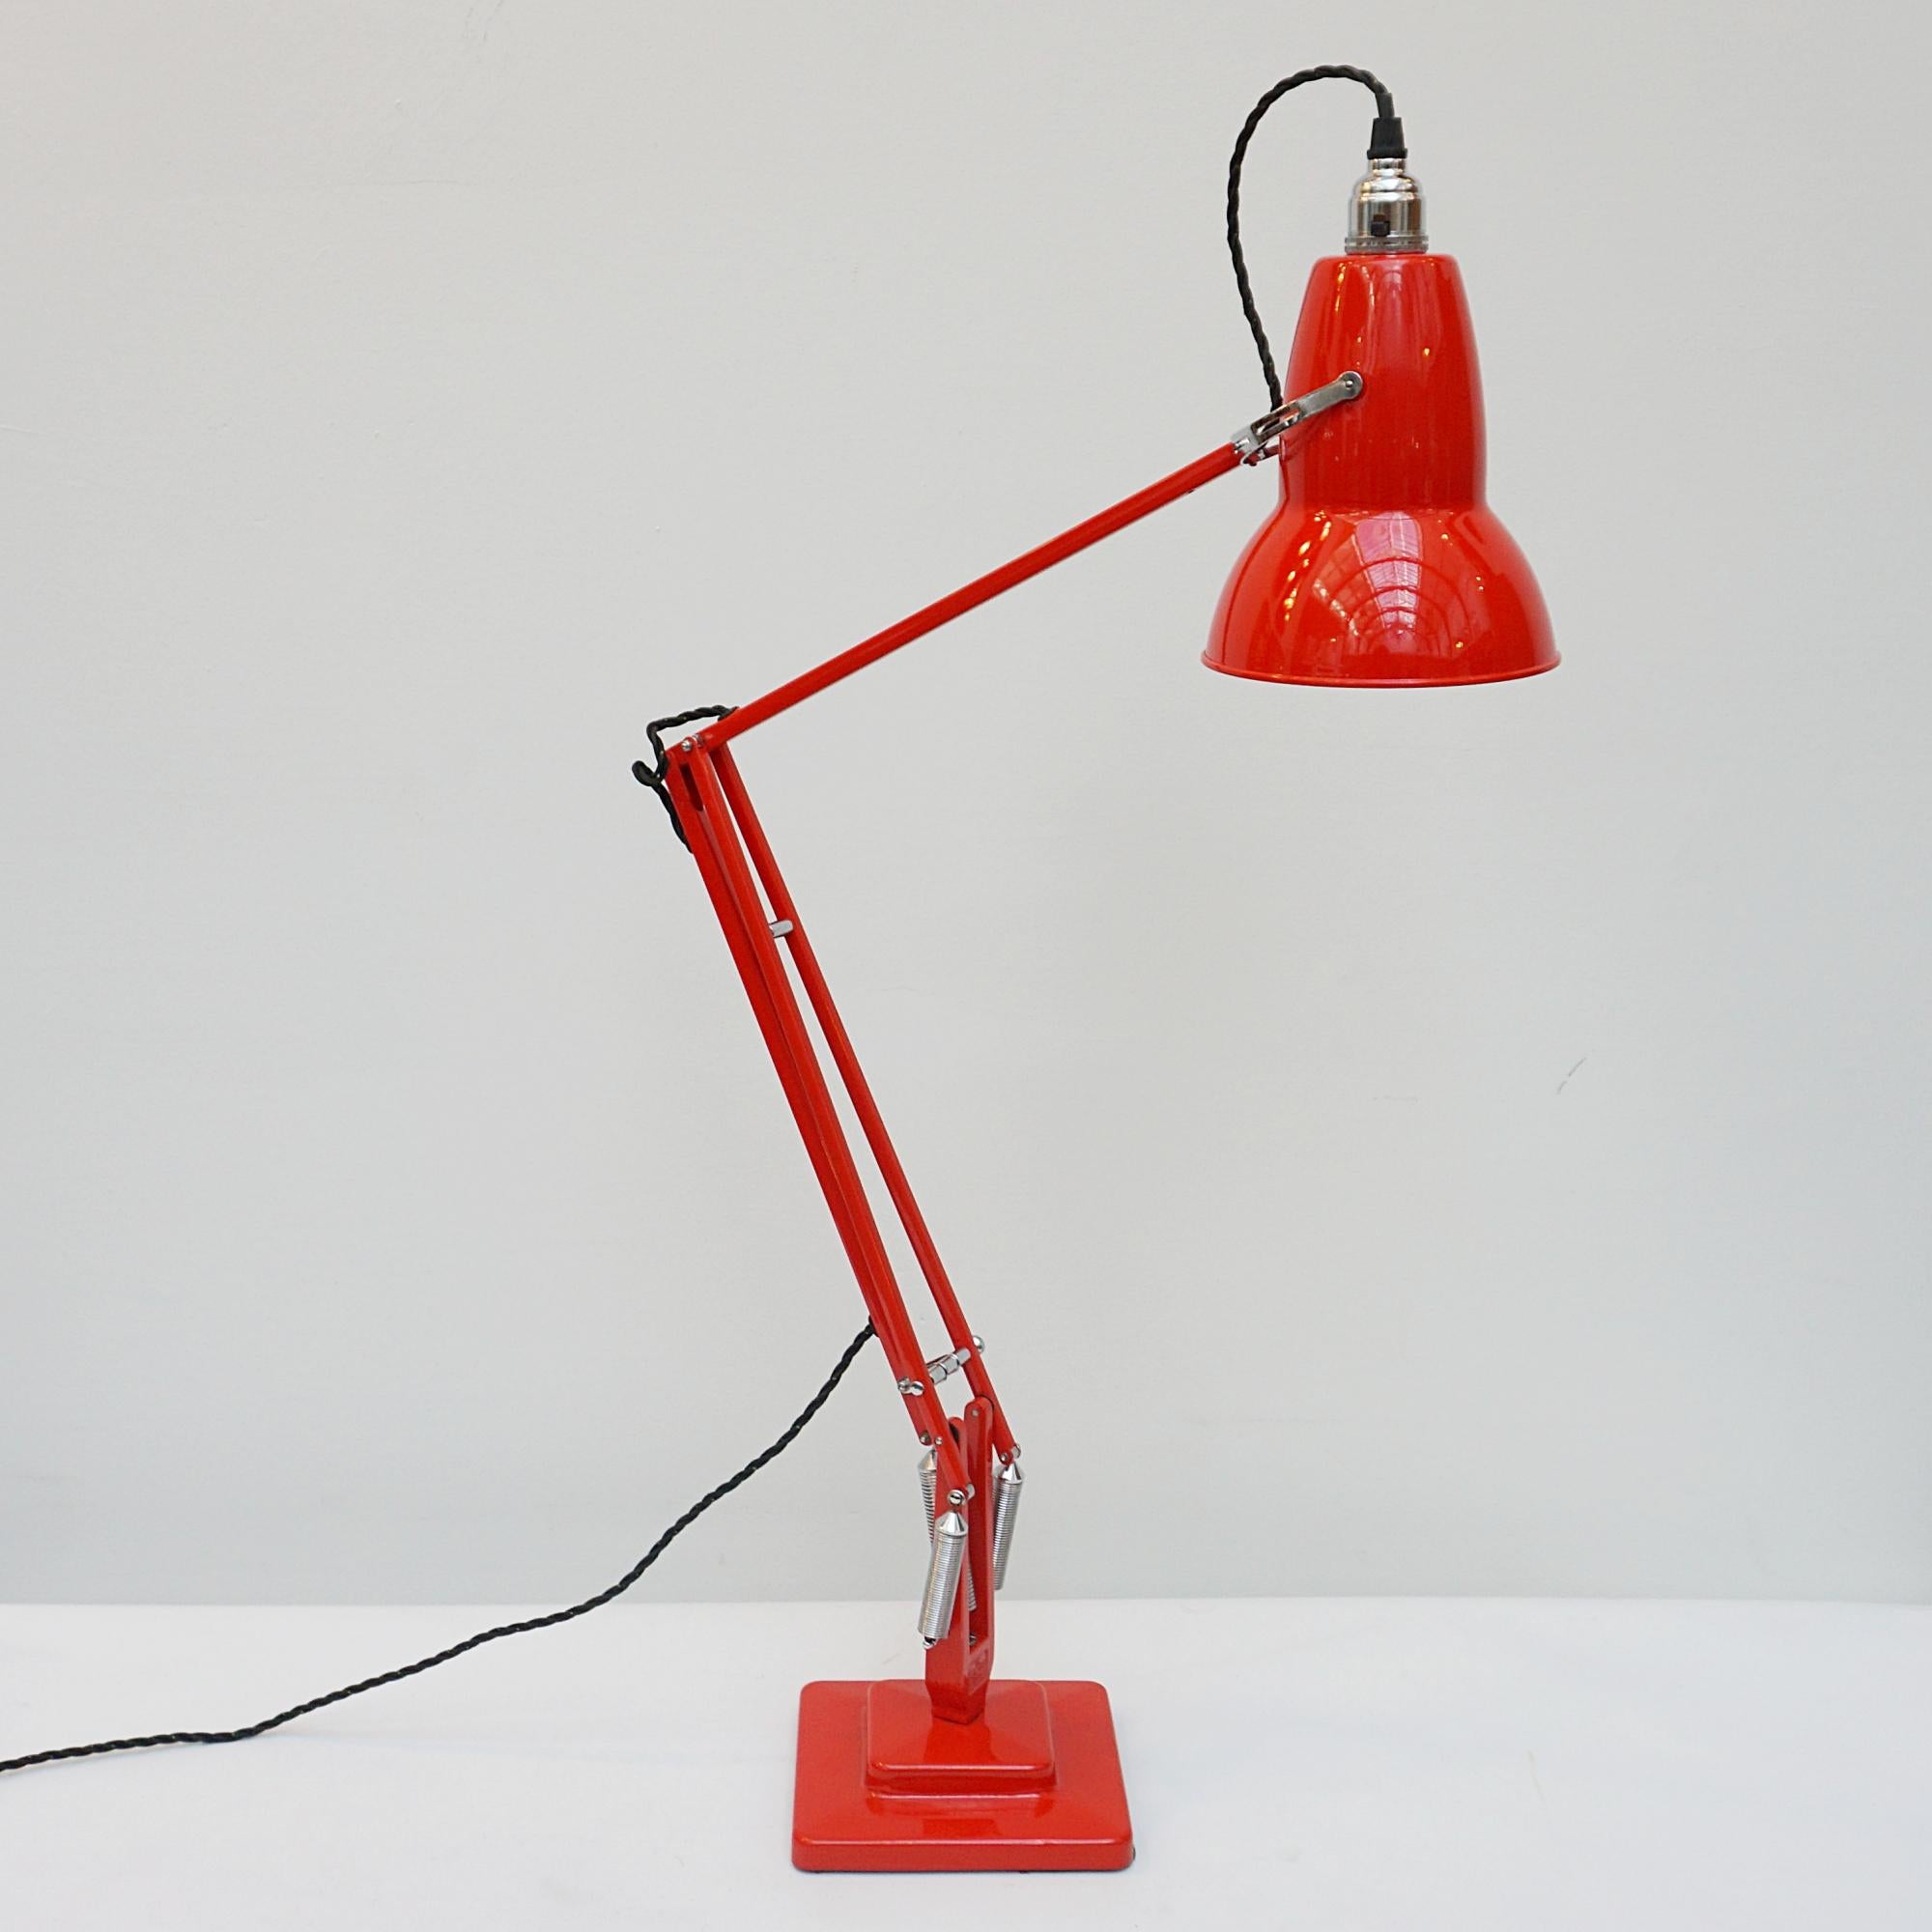 'Three-spring' chromed and polished red painted Anglepoise desk lamp by Herbert Terry & Sons. Two step base and perforated lamp shade. Original stamps to stem. The three spring Anglepoise lamp was first released by Herbert Terry &Sons in 1935. 